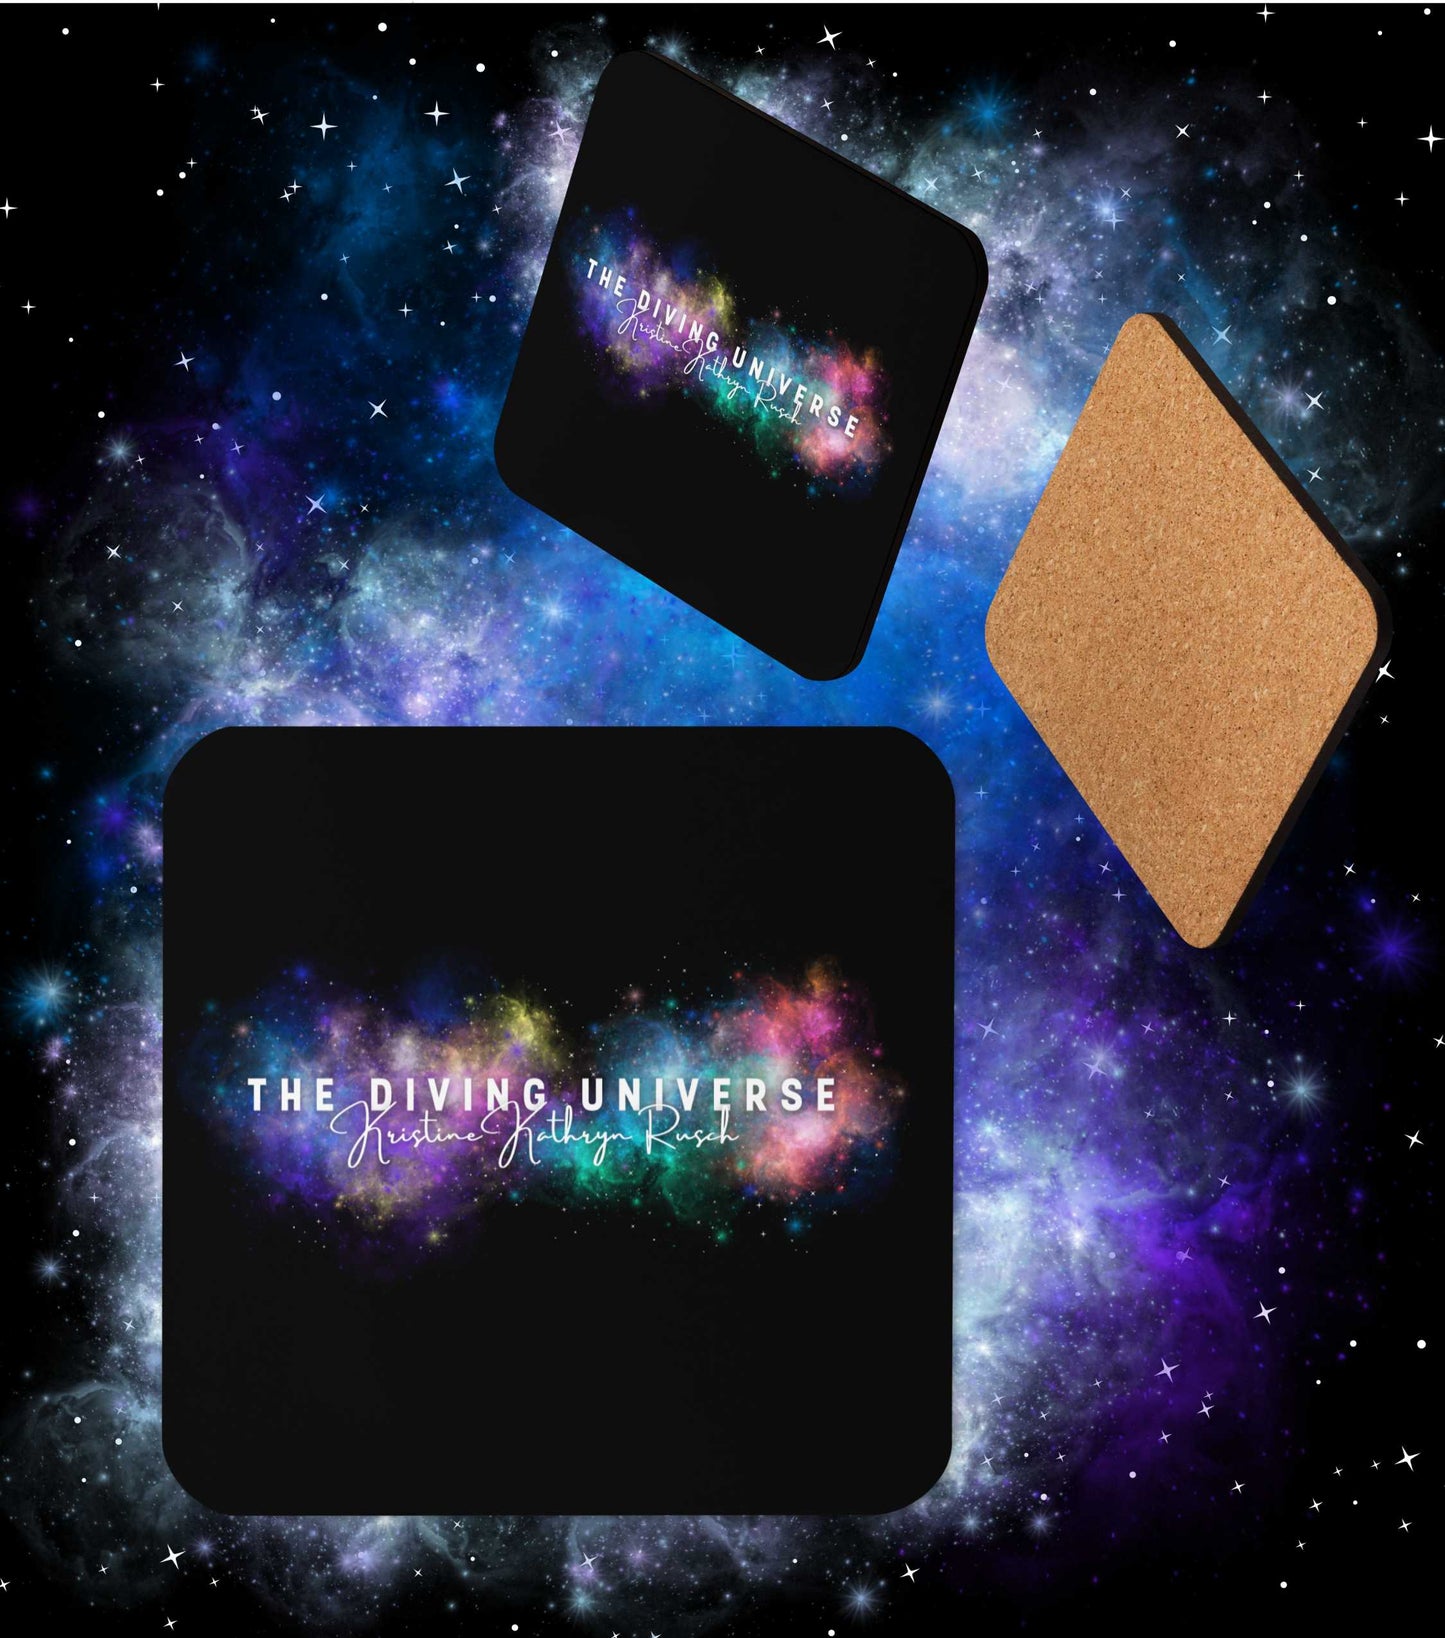 DIVING UNIVERSE NEBULA Logo Coaster (Cork-Backed) - The Diving Universe (SPACE OPERA Book Series) by Kristine Kathryn Rusch